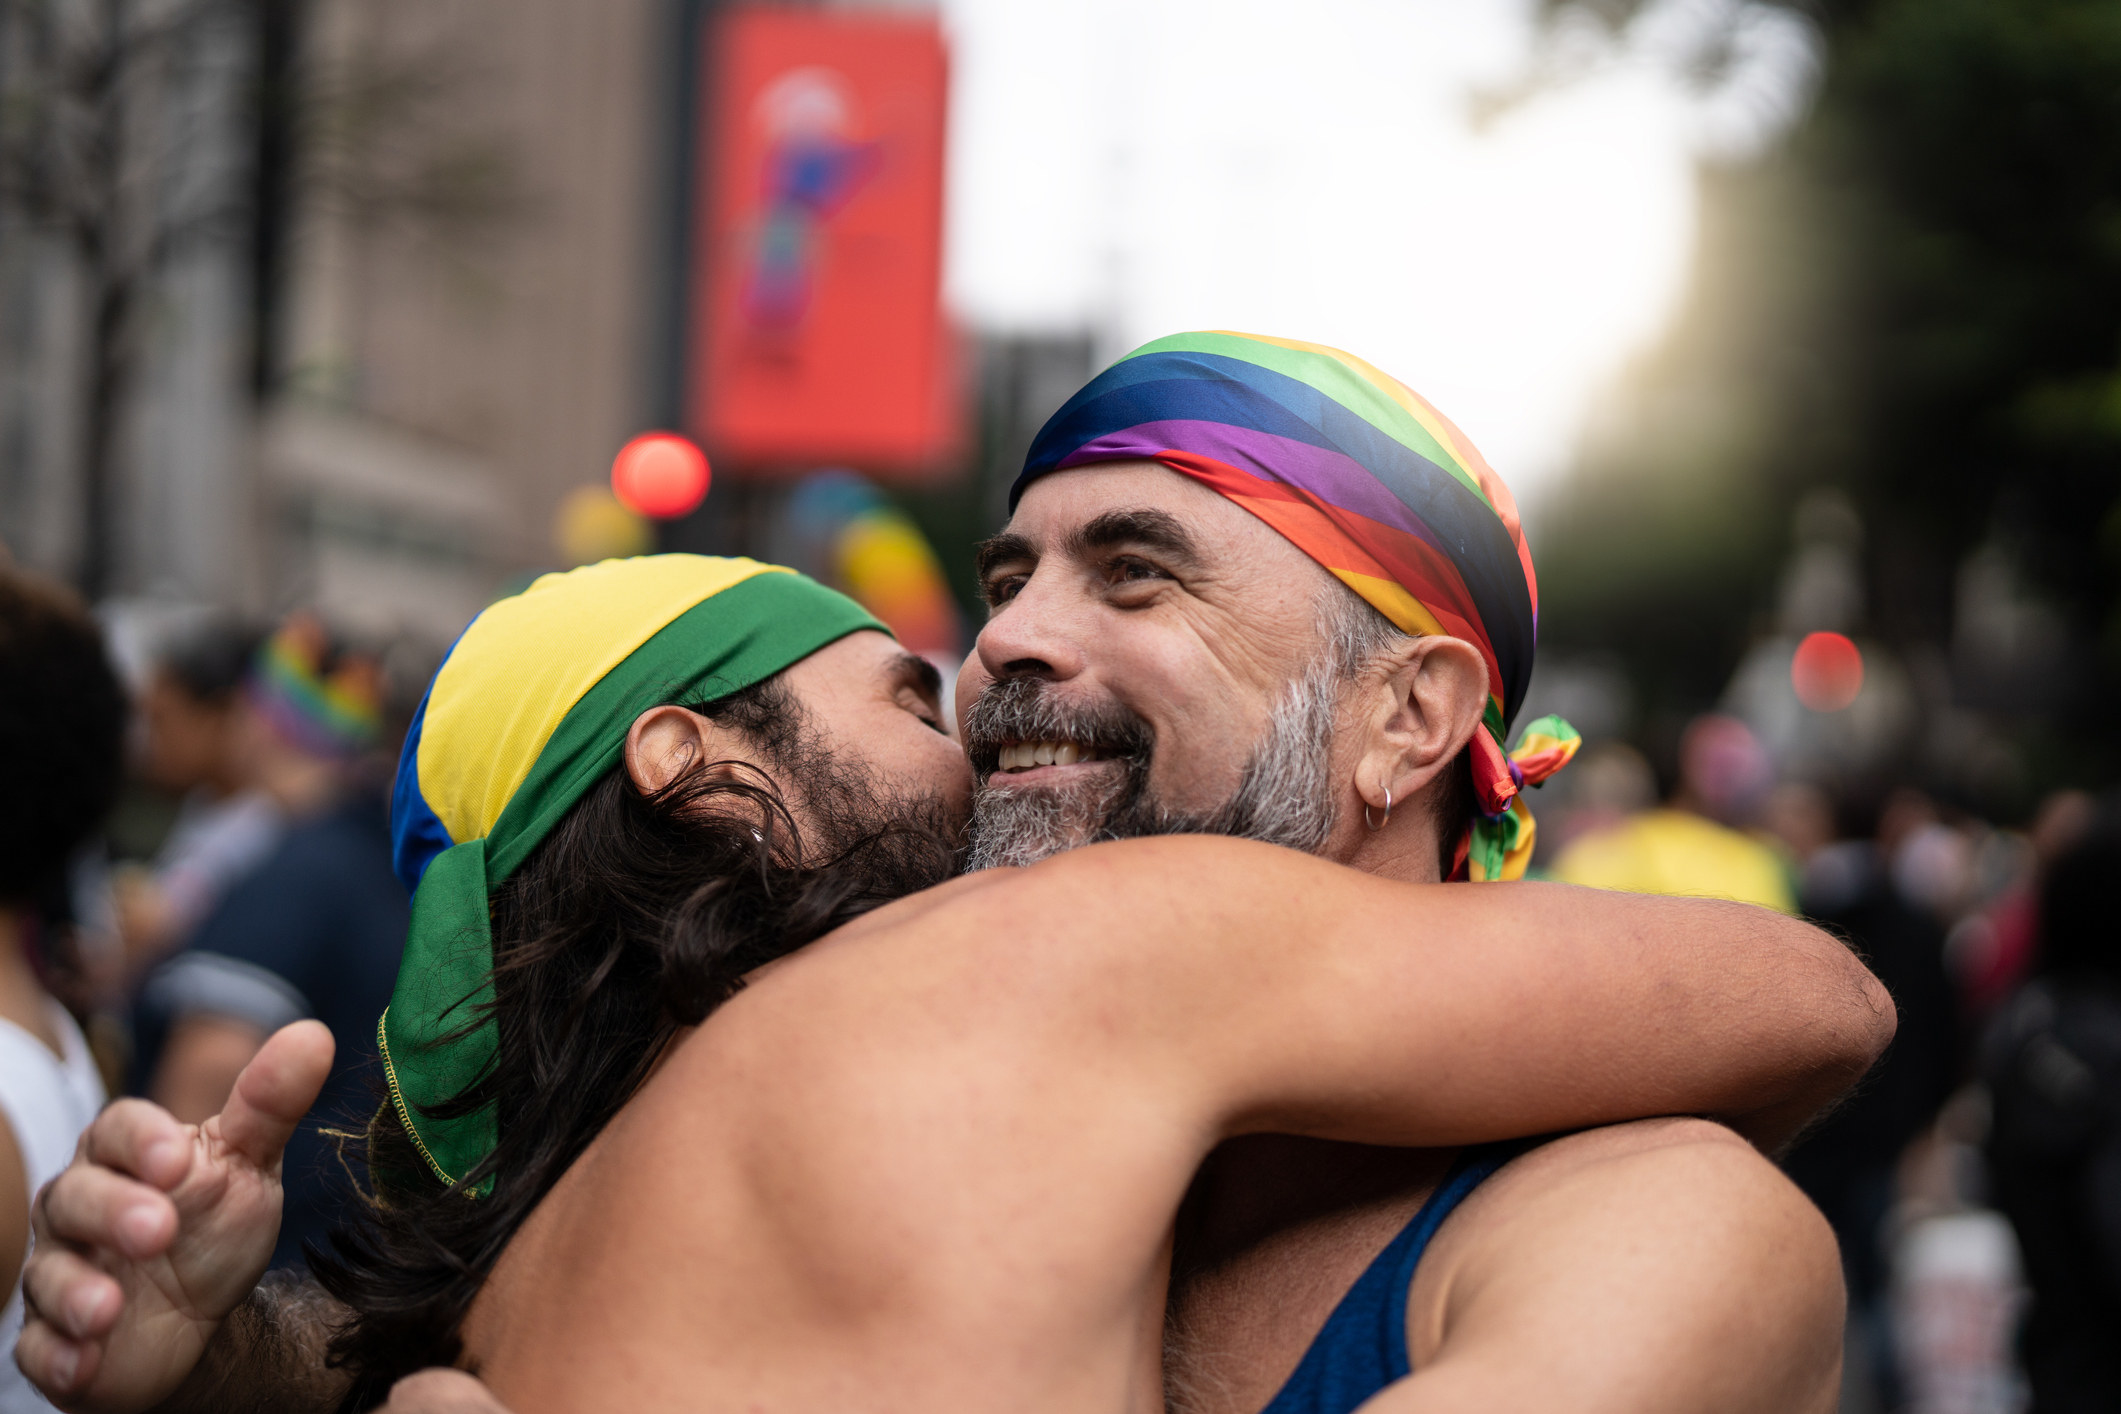 Gay man with gray beard is embraced by a younger gay during a Pride event